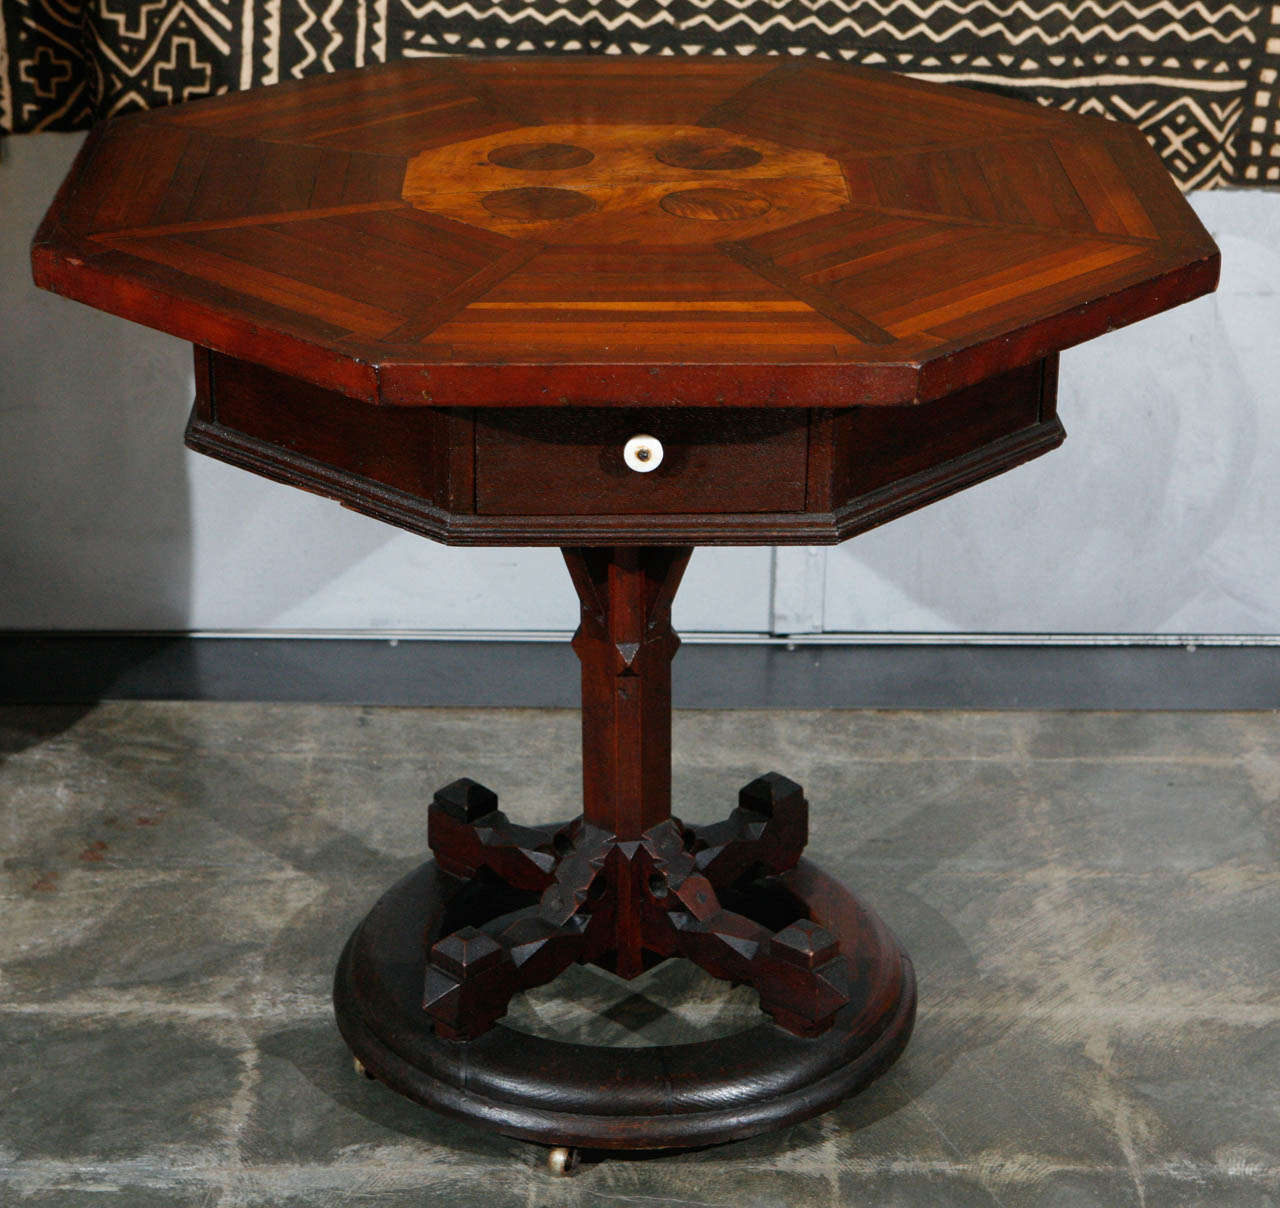 American Folk Art Table Signed and Dated 1881 In Good Condition For Sale In Culver City, CA